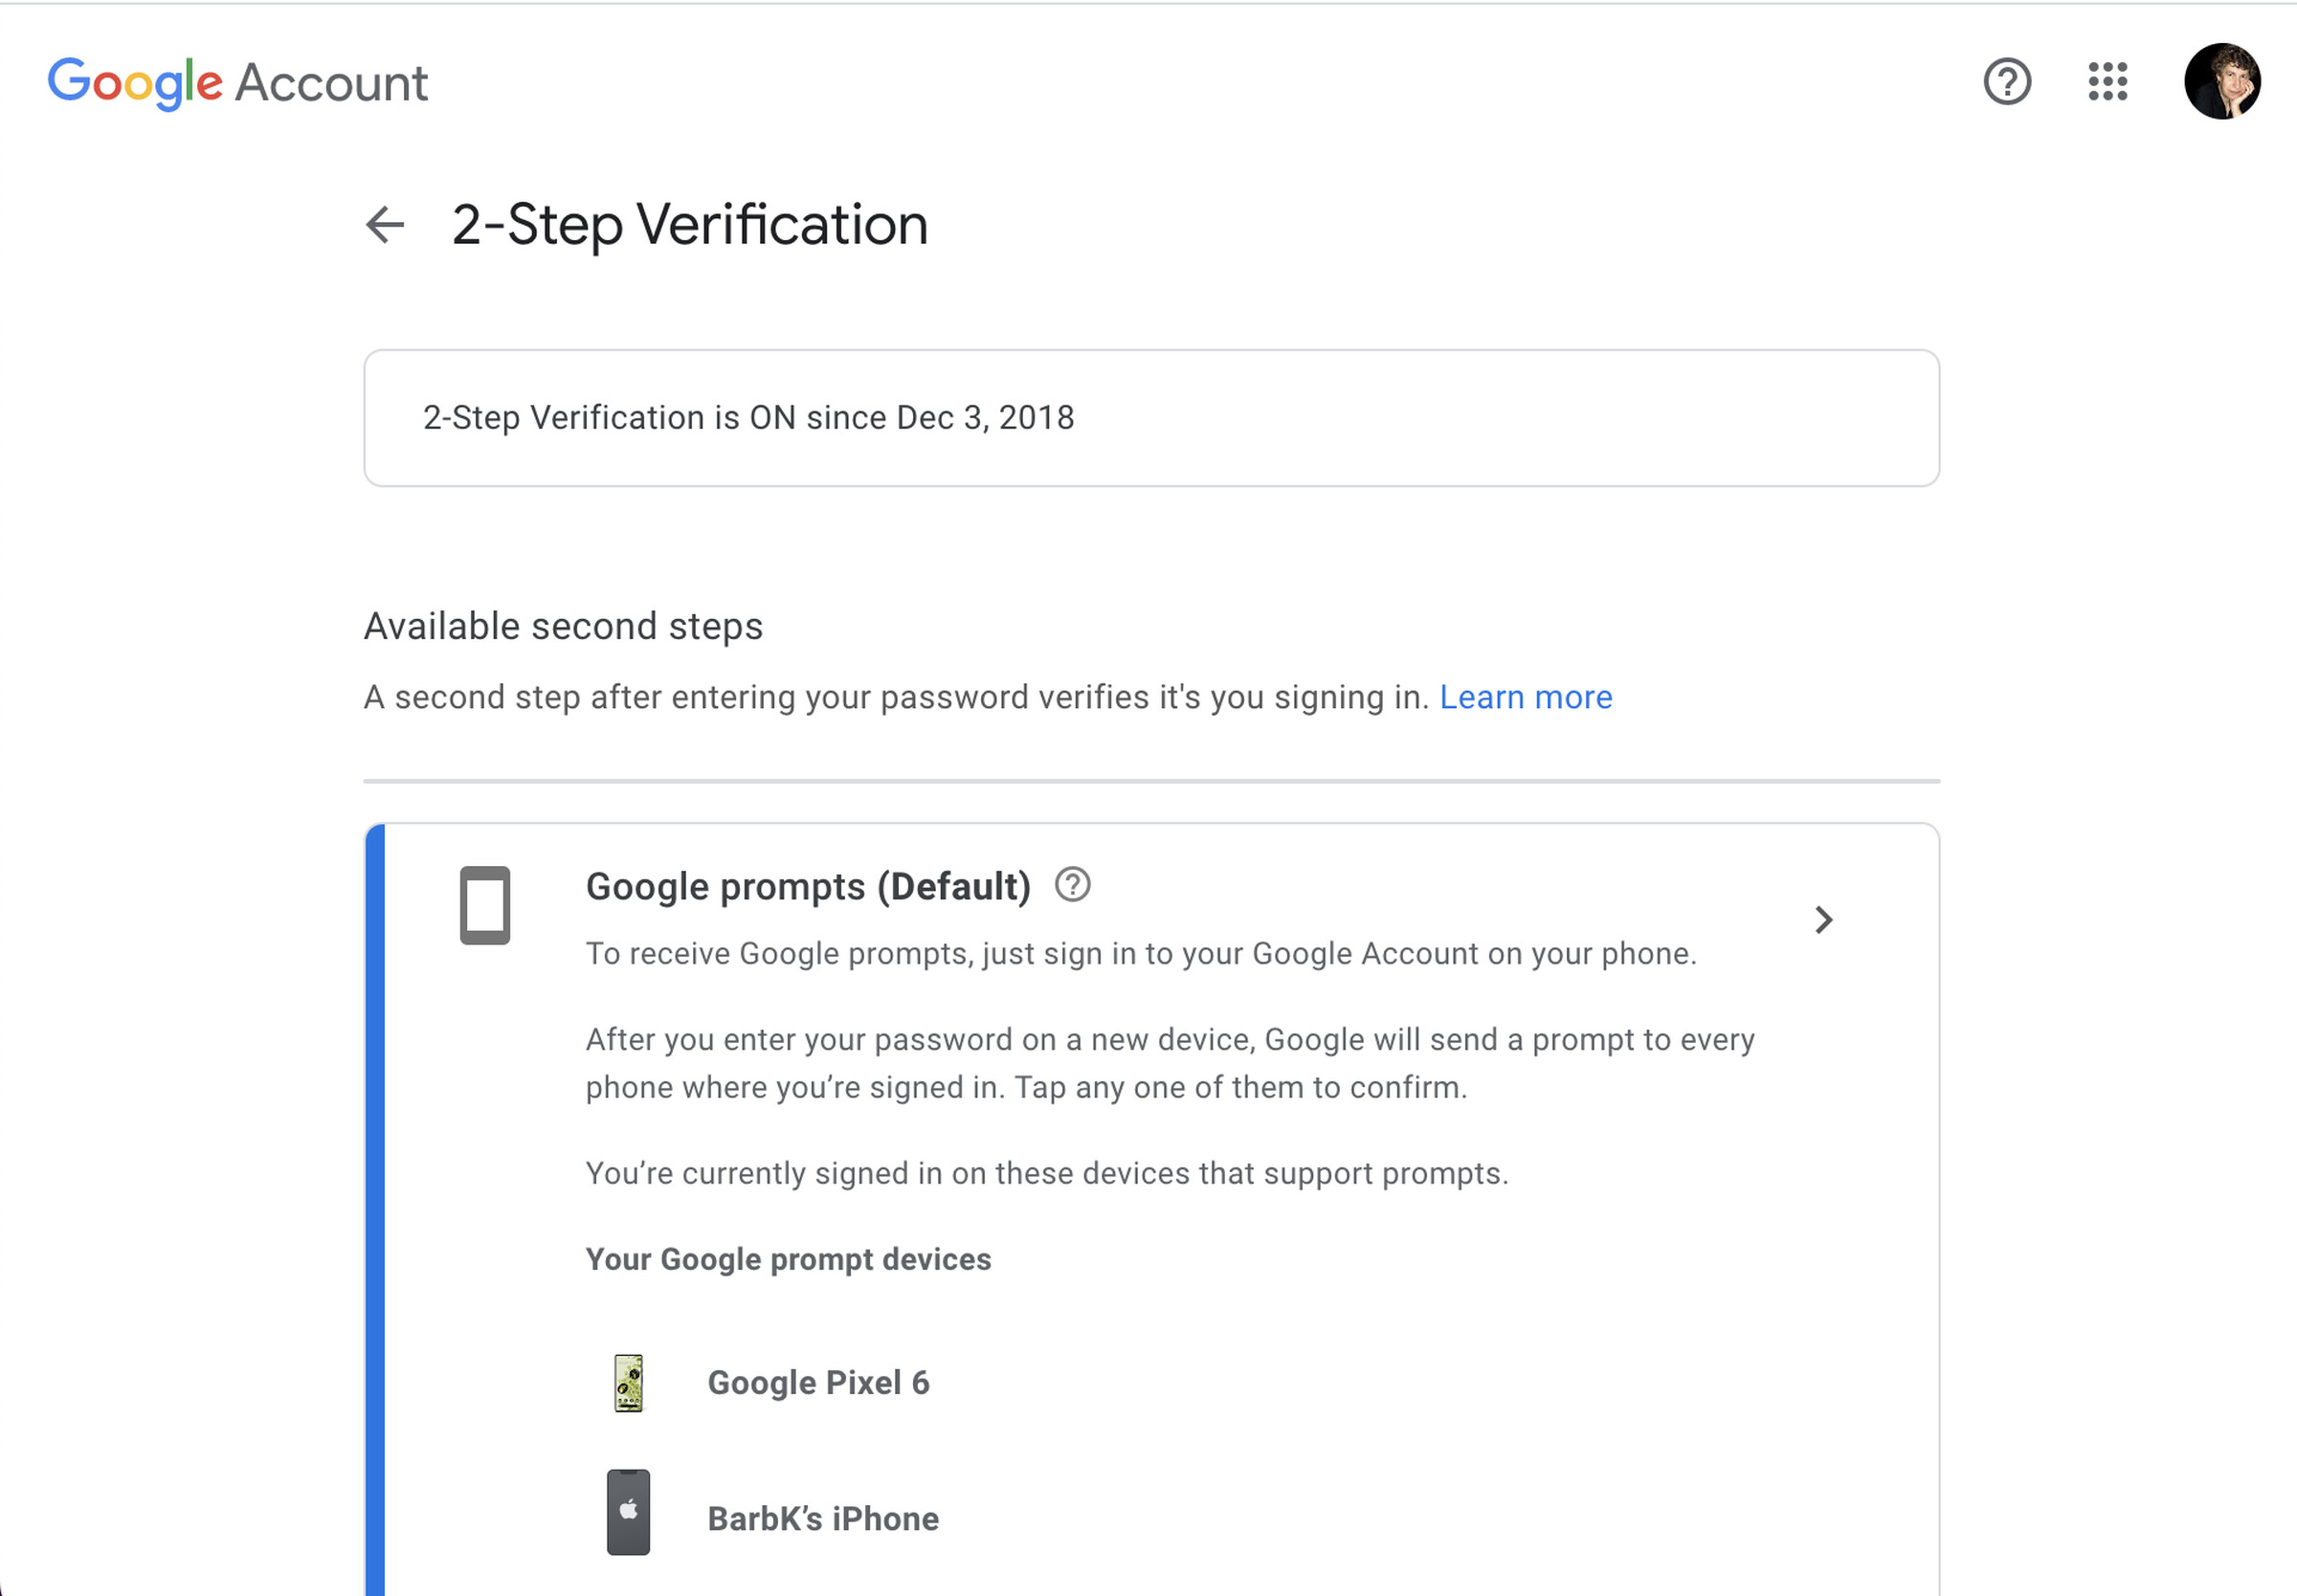 Google’s 2-step verification page showing a list of different type of verification you can use.